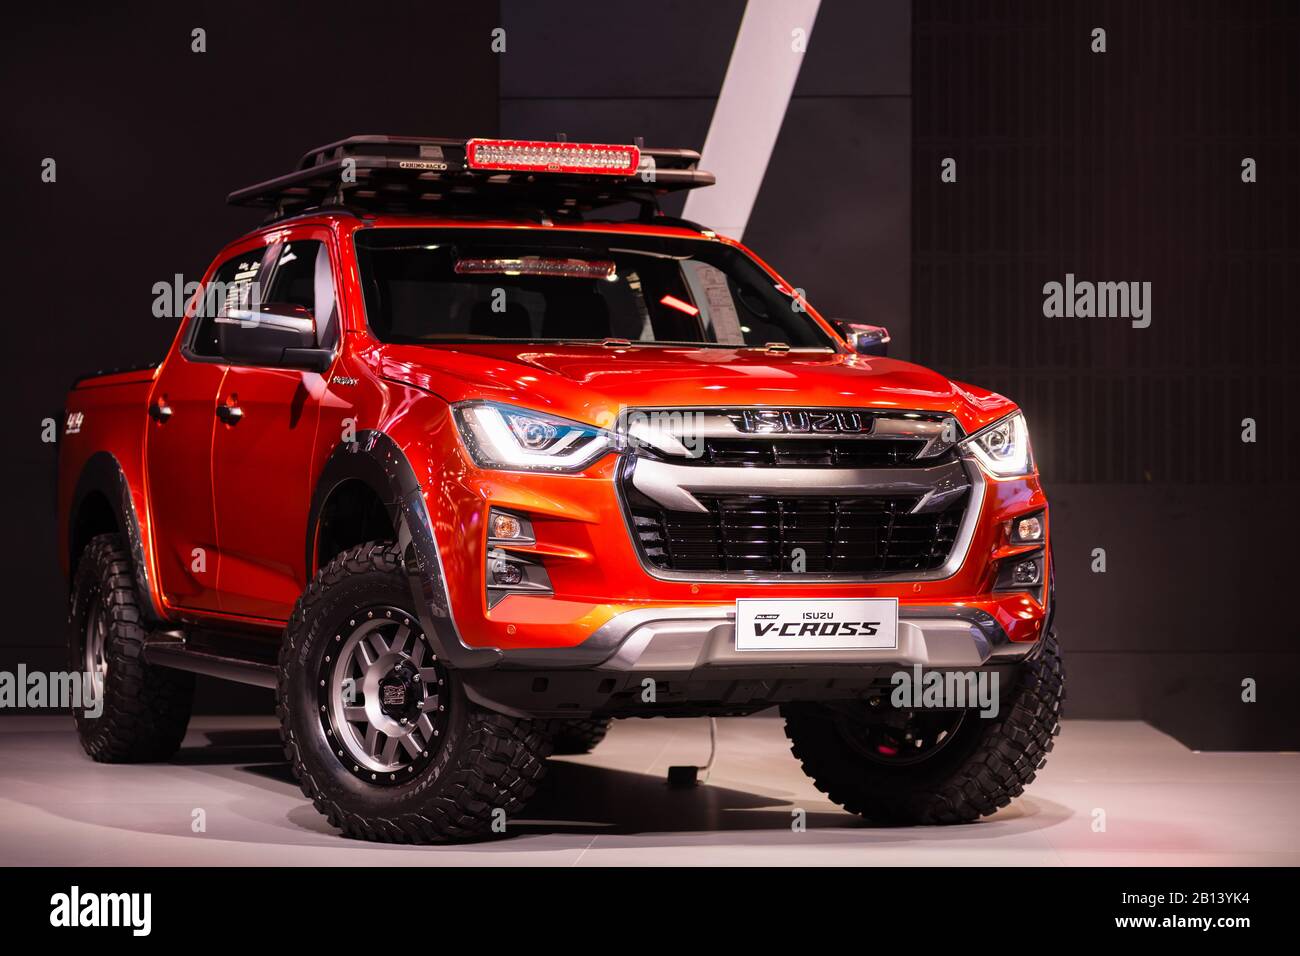 Bangkok, Thailand - February 23, 2020 : Isuzu D-Max V-Cross  4x4, range-topping double-cab pickup, the dressed-up D-Max aims to steal share from other Stock Photo